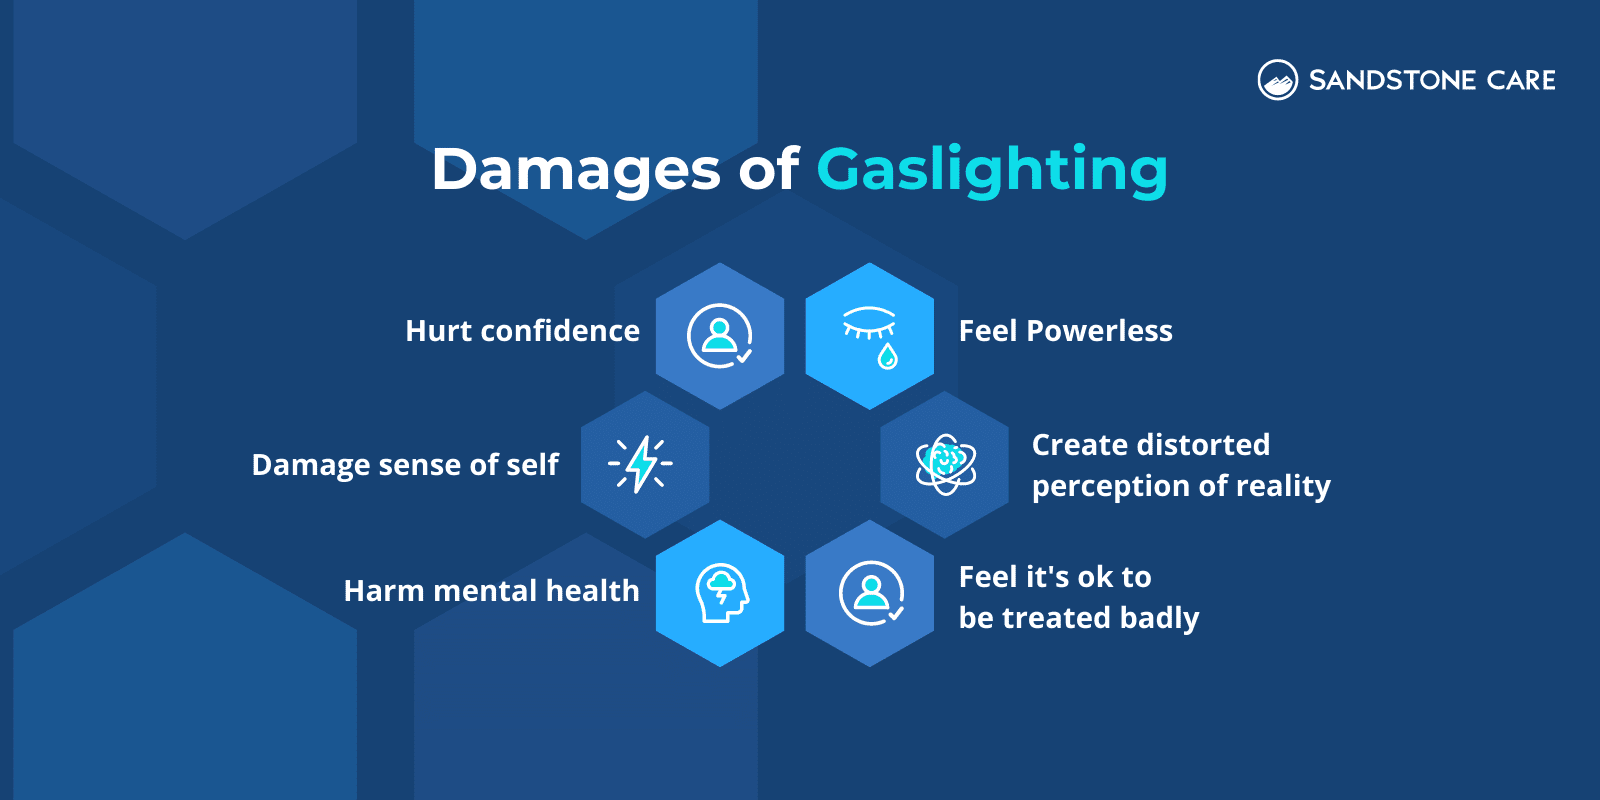 Damages Of Gaslighting written above a hexagon chart each containing an icon that represents different damages of gaslighting